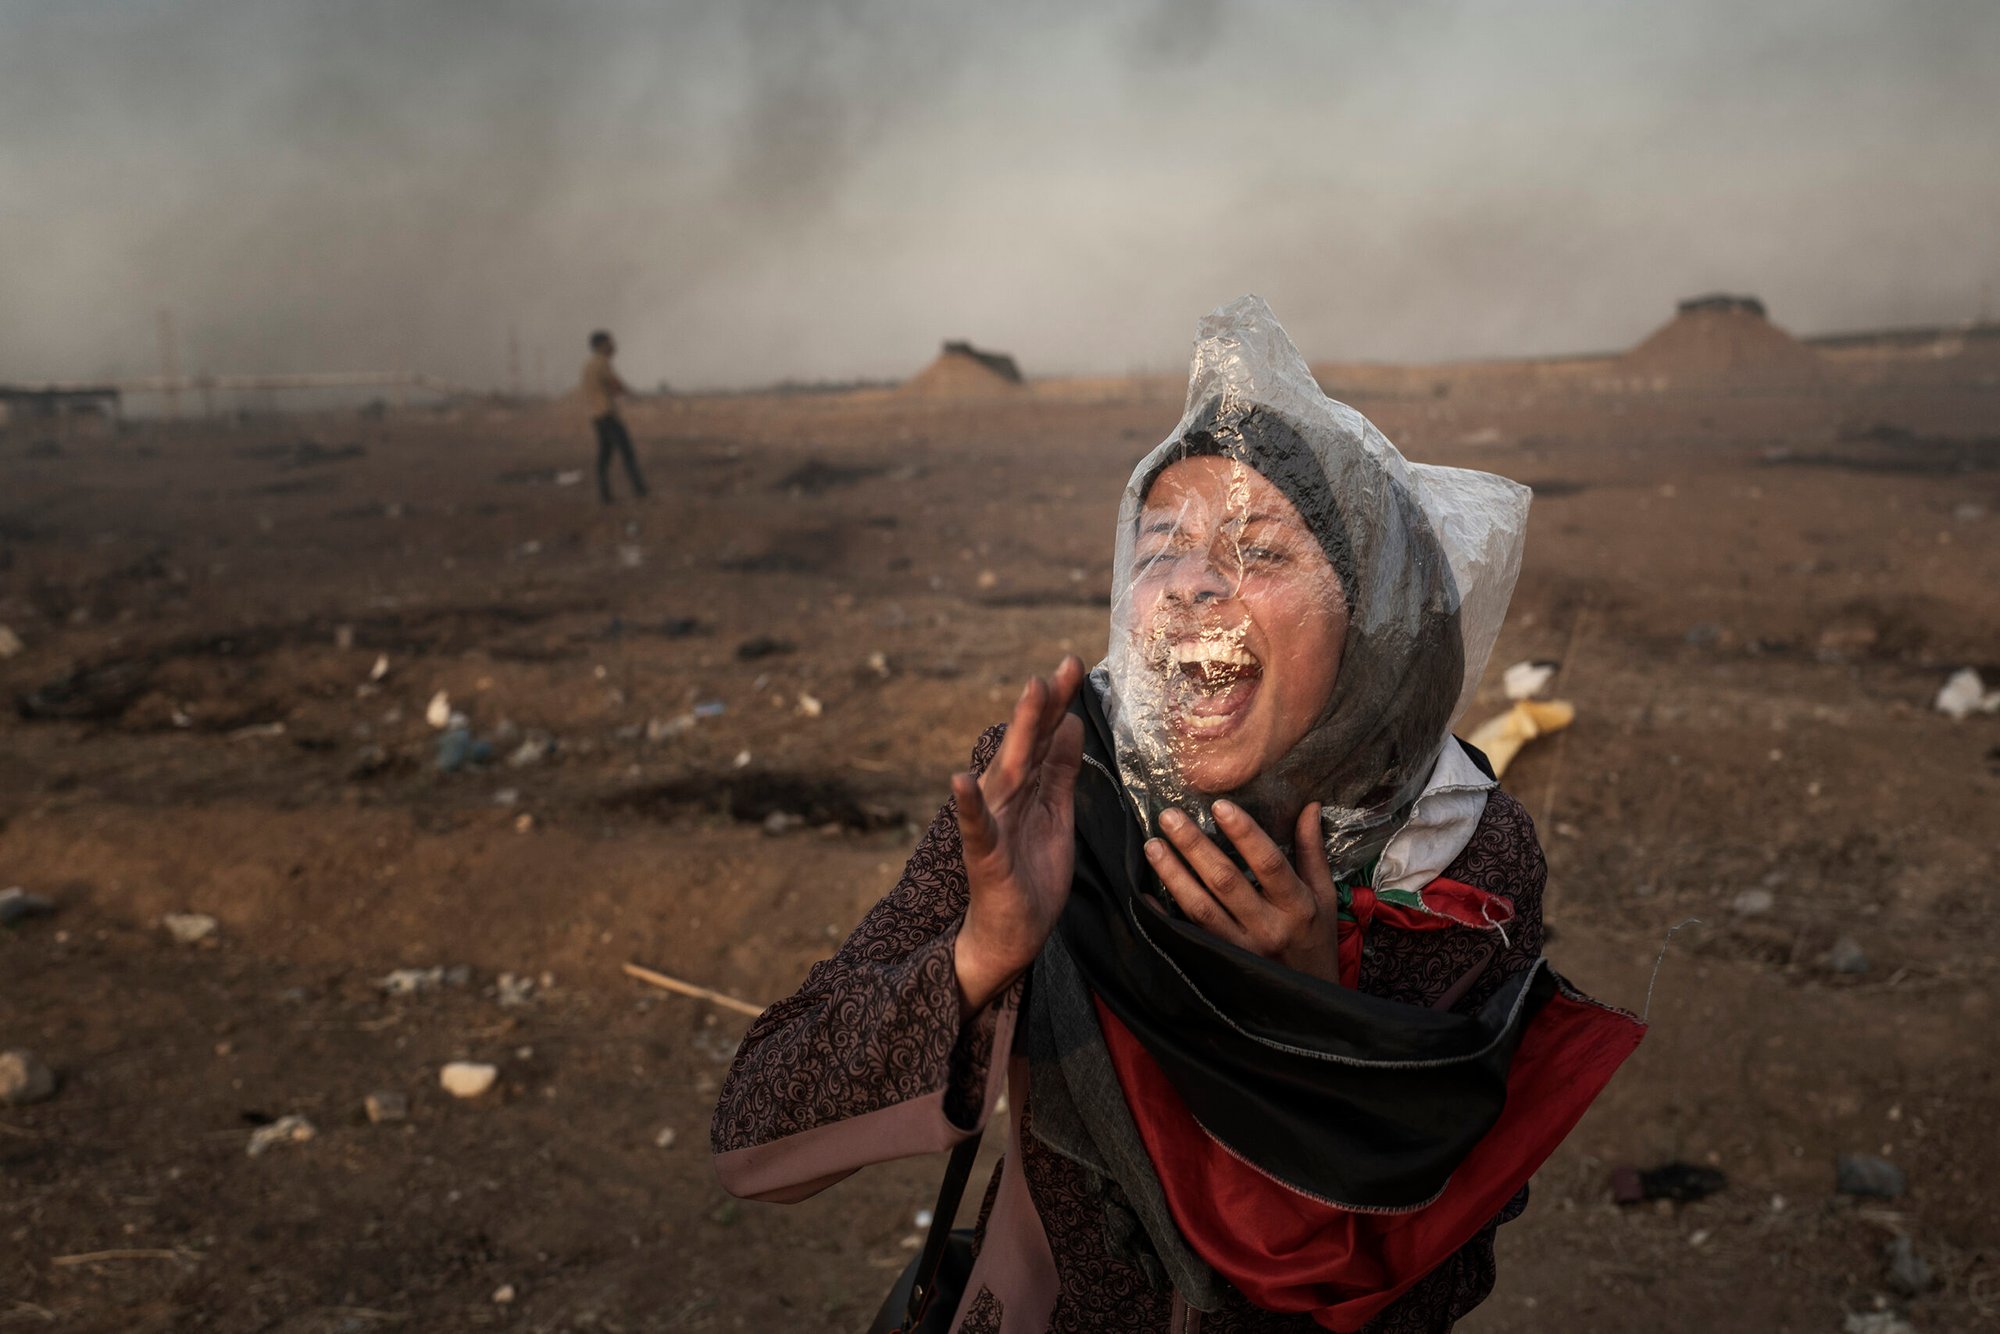 A Palestinian woman protestor wears a plastic bag on her face to protect against tear gas in Gaza, Palestine.